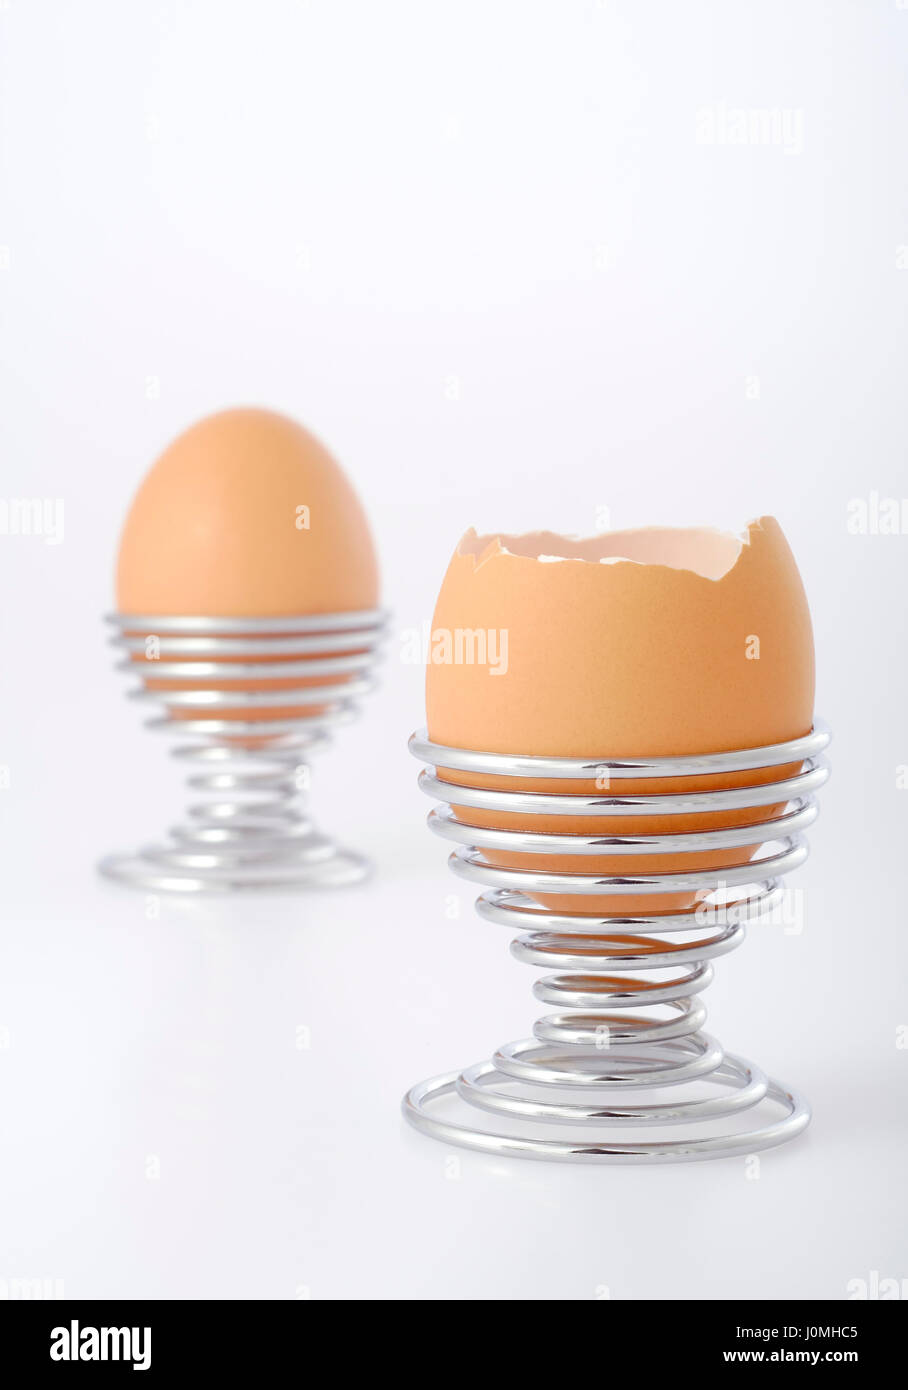 Two eggs in wire eggcups on bright background. Focus on front egg with partially removed eggshell. Copy space at top of photo. Stock Photo